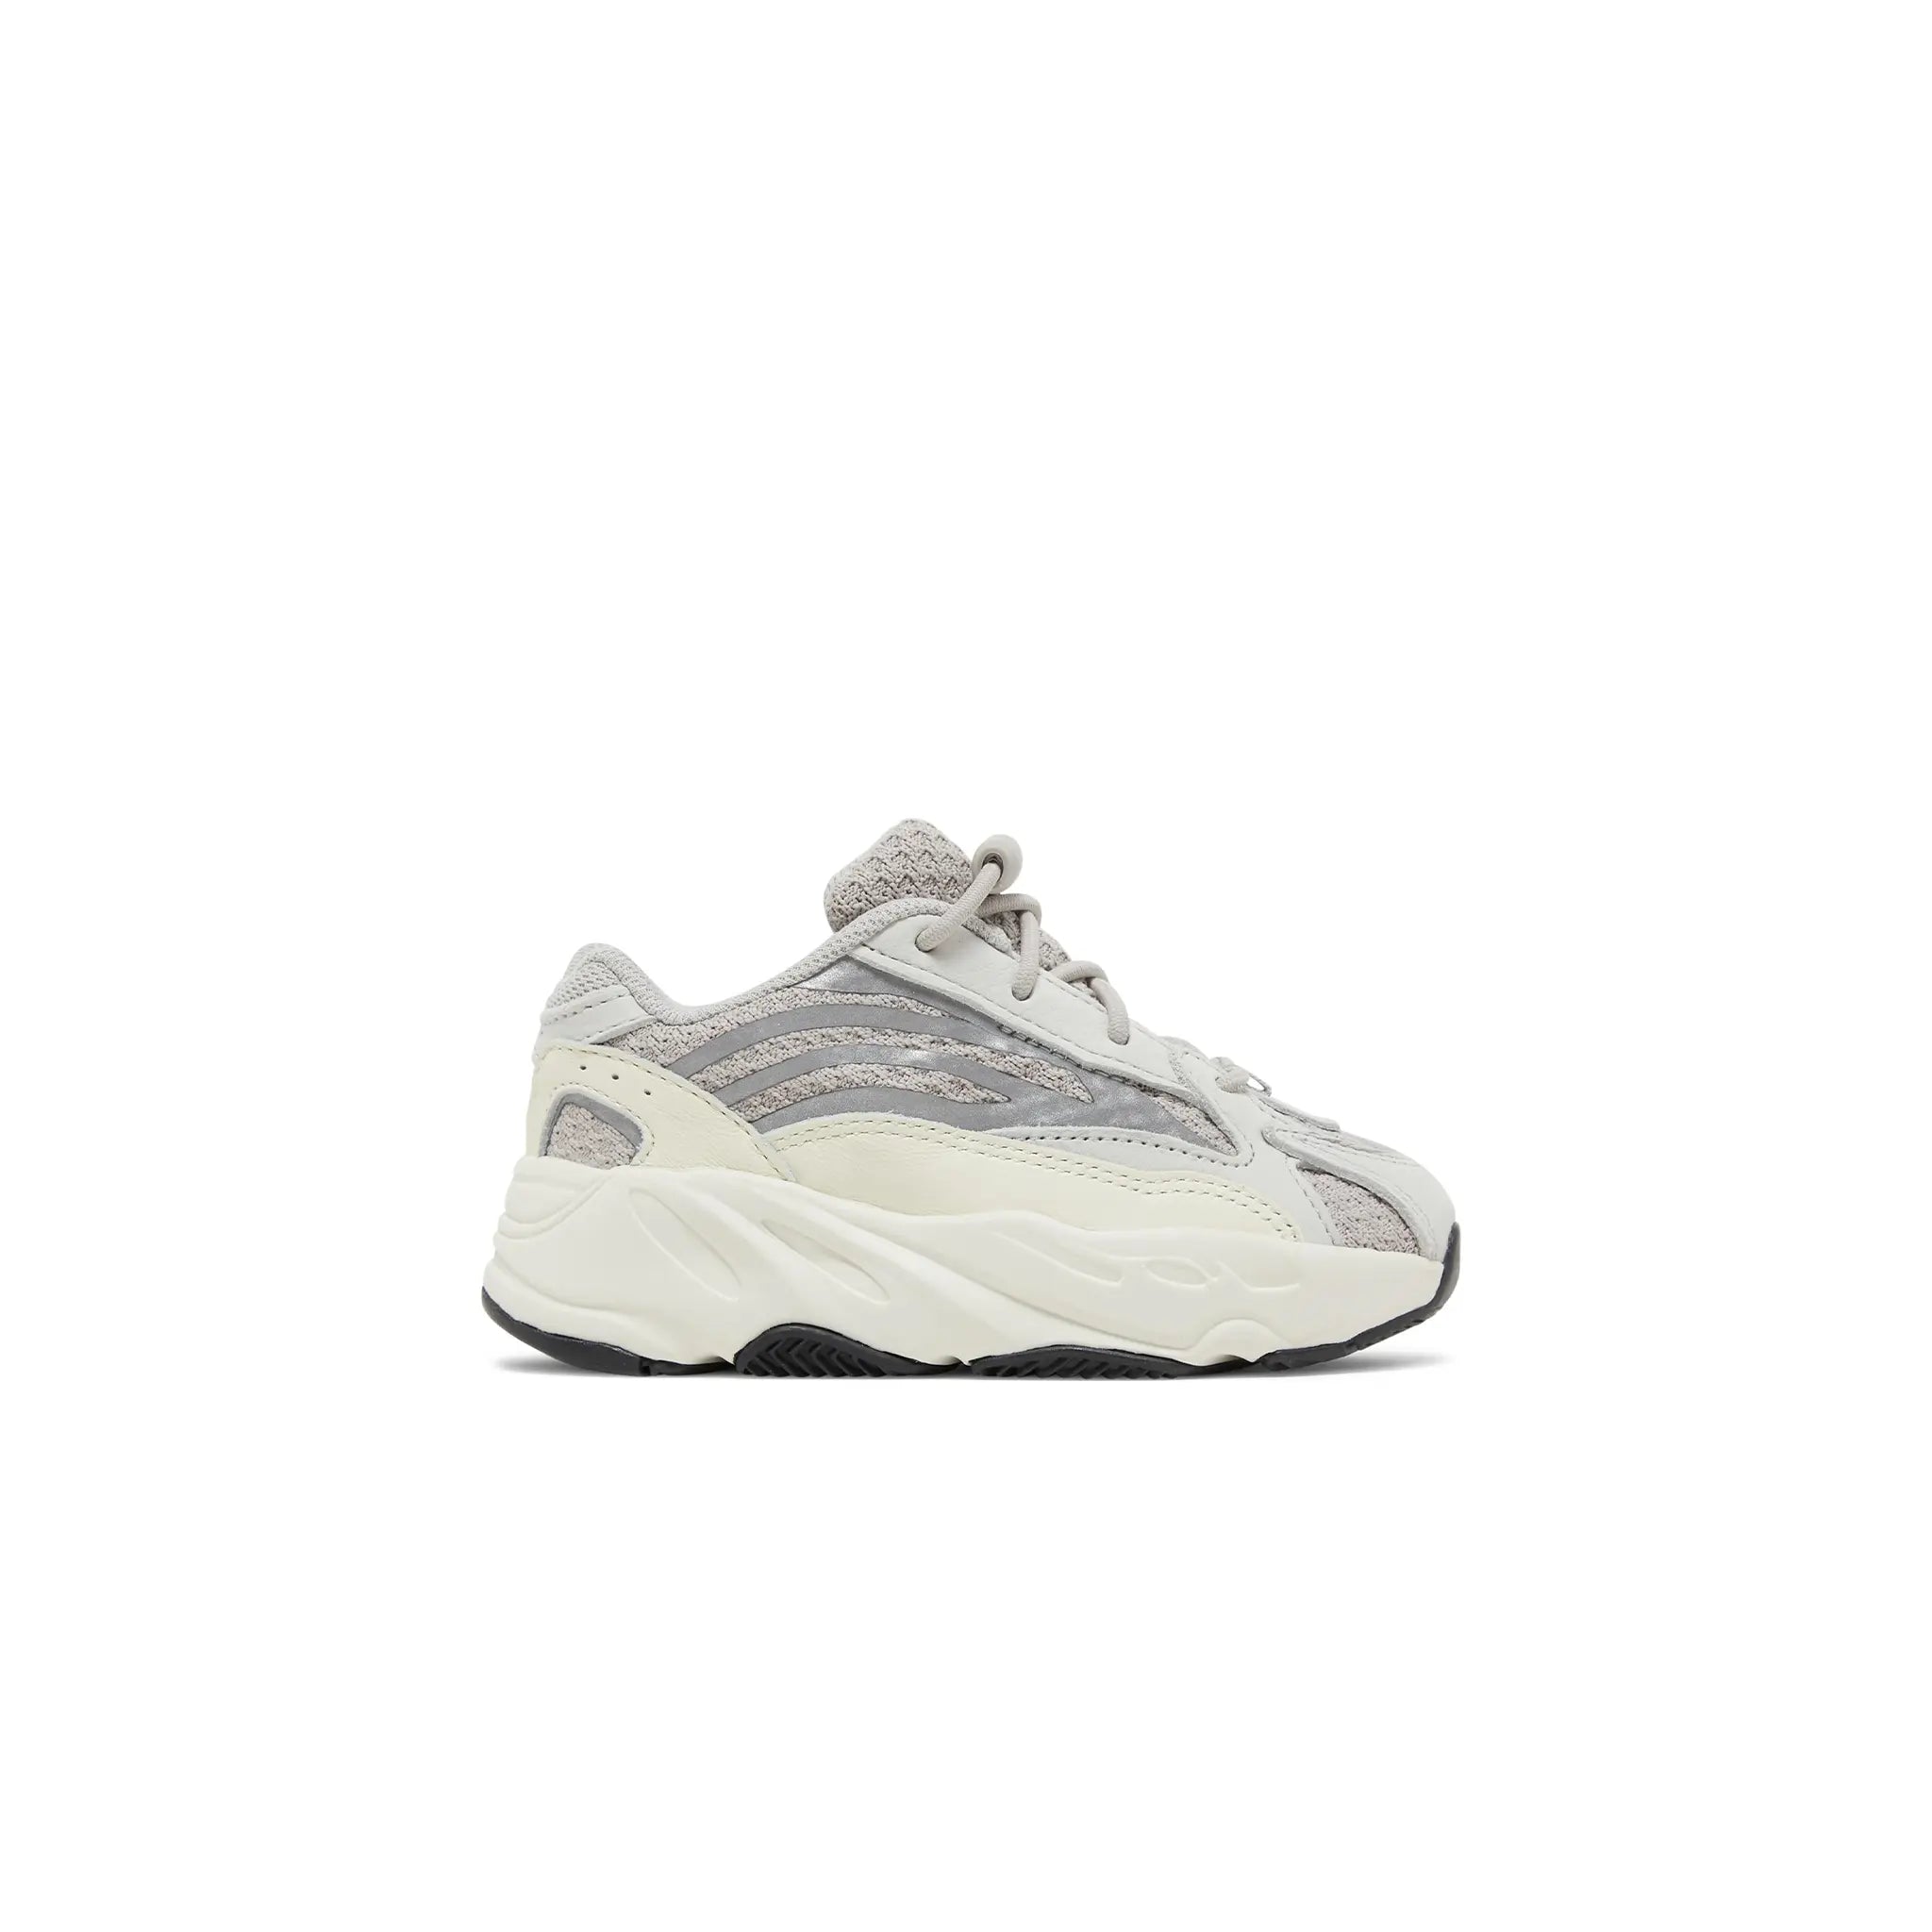 Side view of Adidas Yeezy Boost 700 V2 Infants Static HQ6967